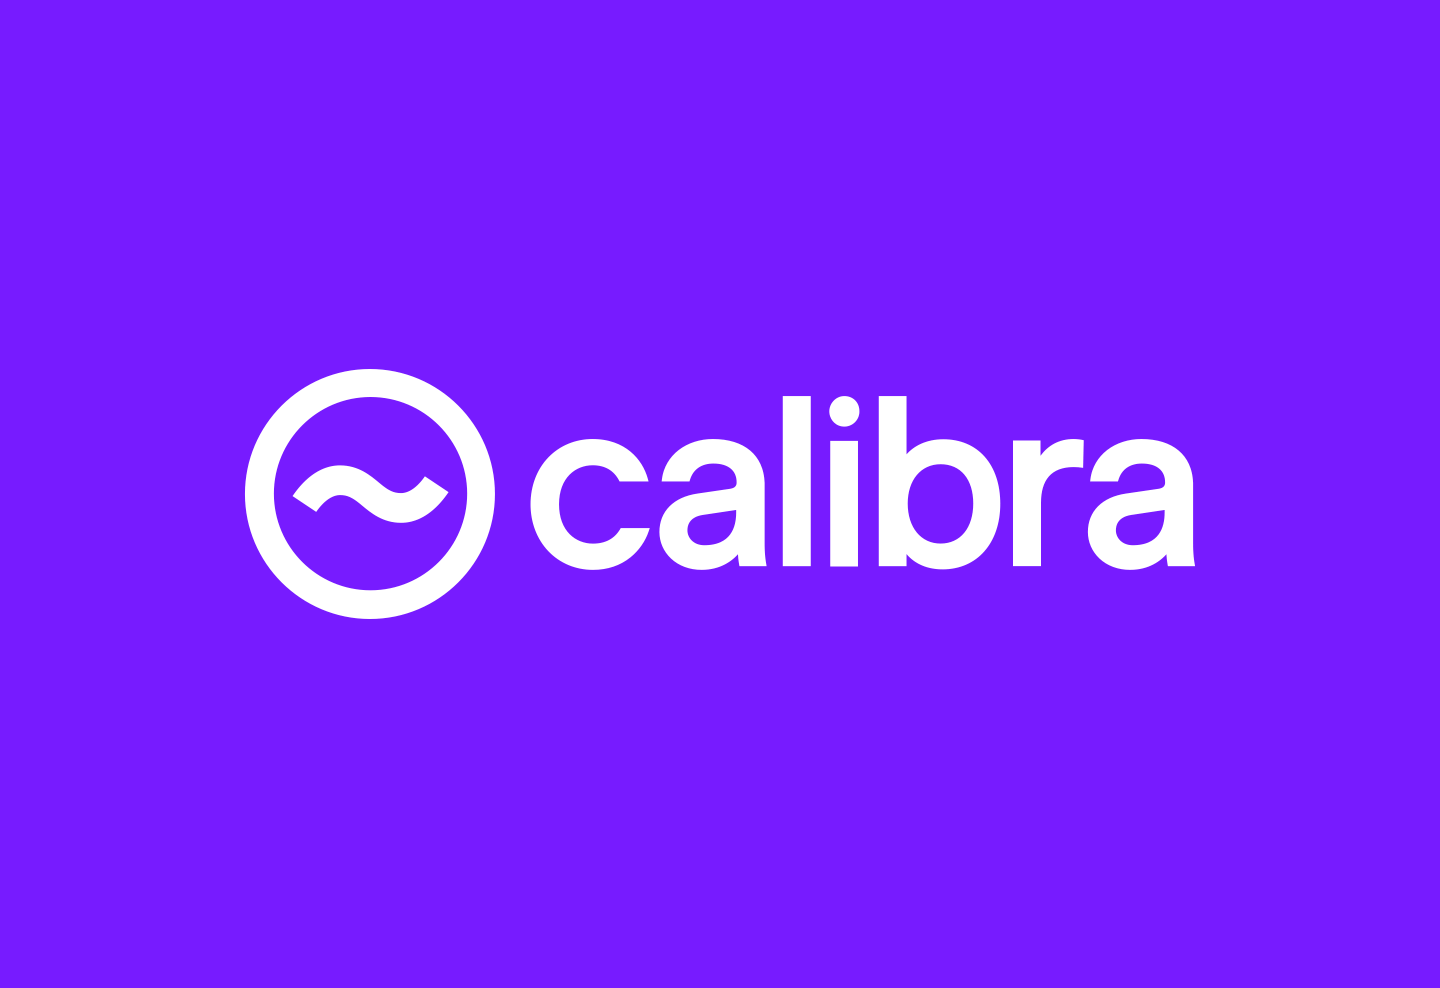 Facebook's digital wallet Calibra: What it could mean for marketers